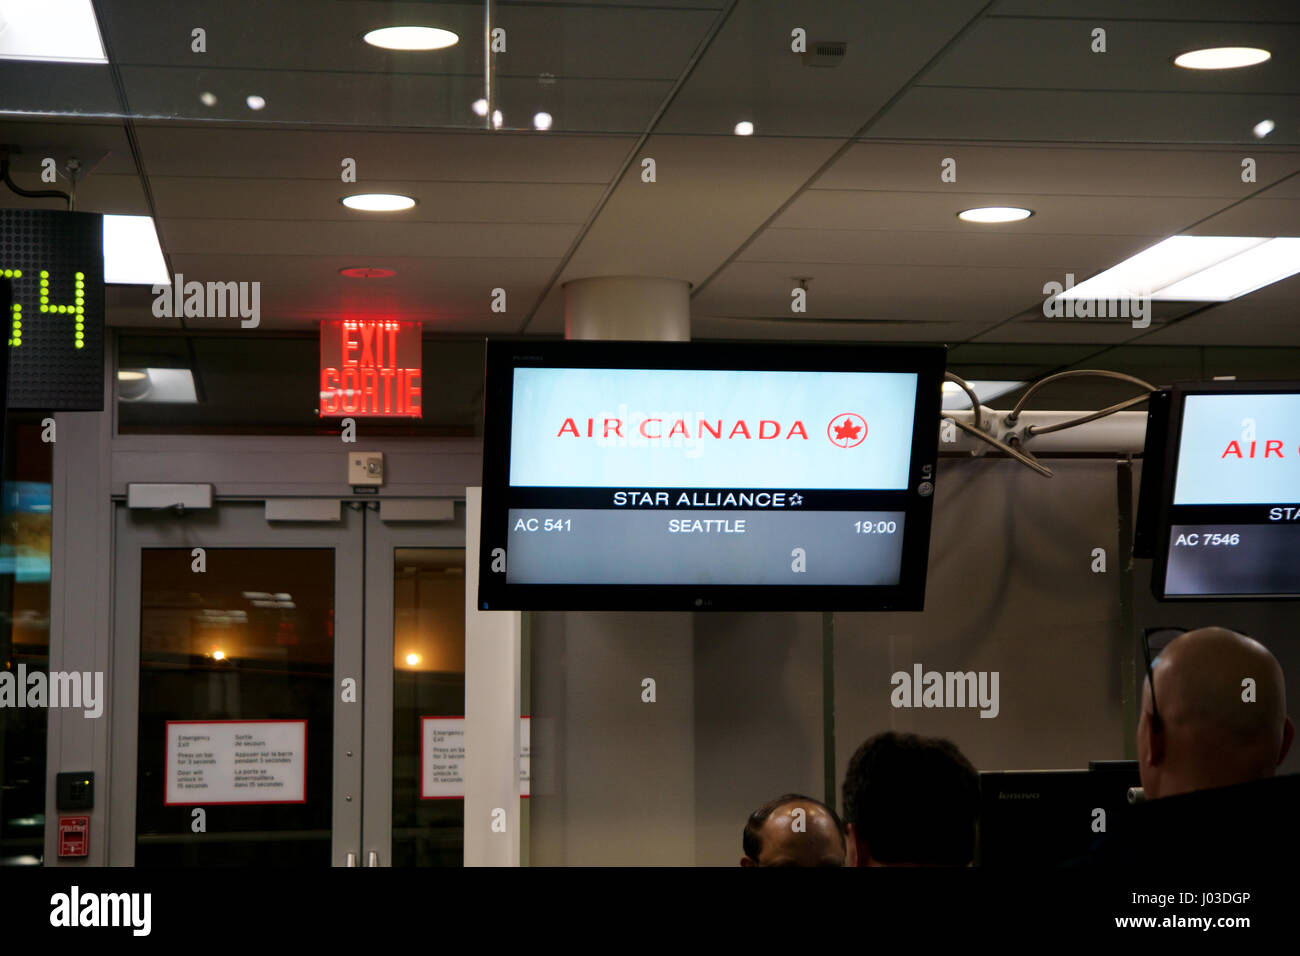 TORONTO, CANADA - JAN 21st, 2017: Air Canada Boarding Gate at YYZ airport on my way to Seattle, depature screen Stock Photo